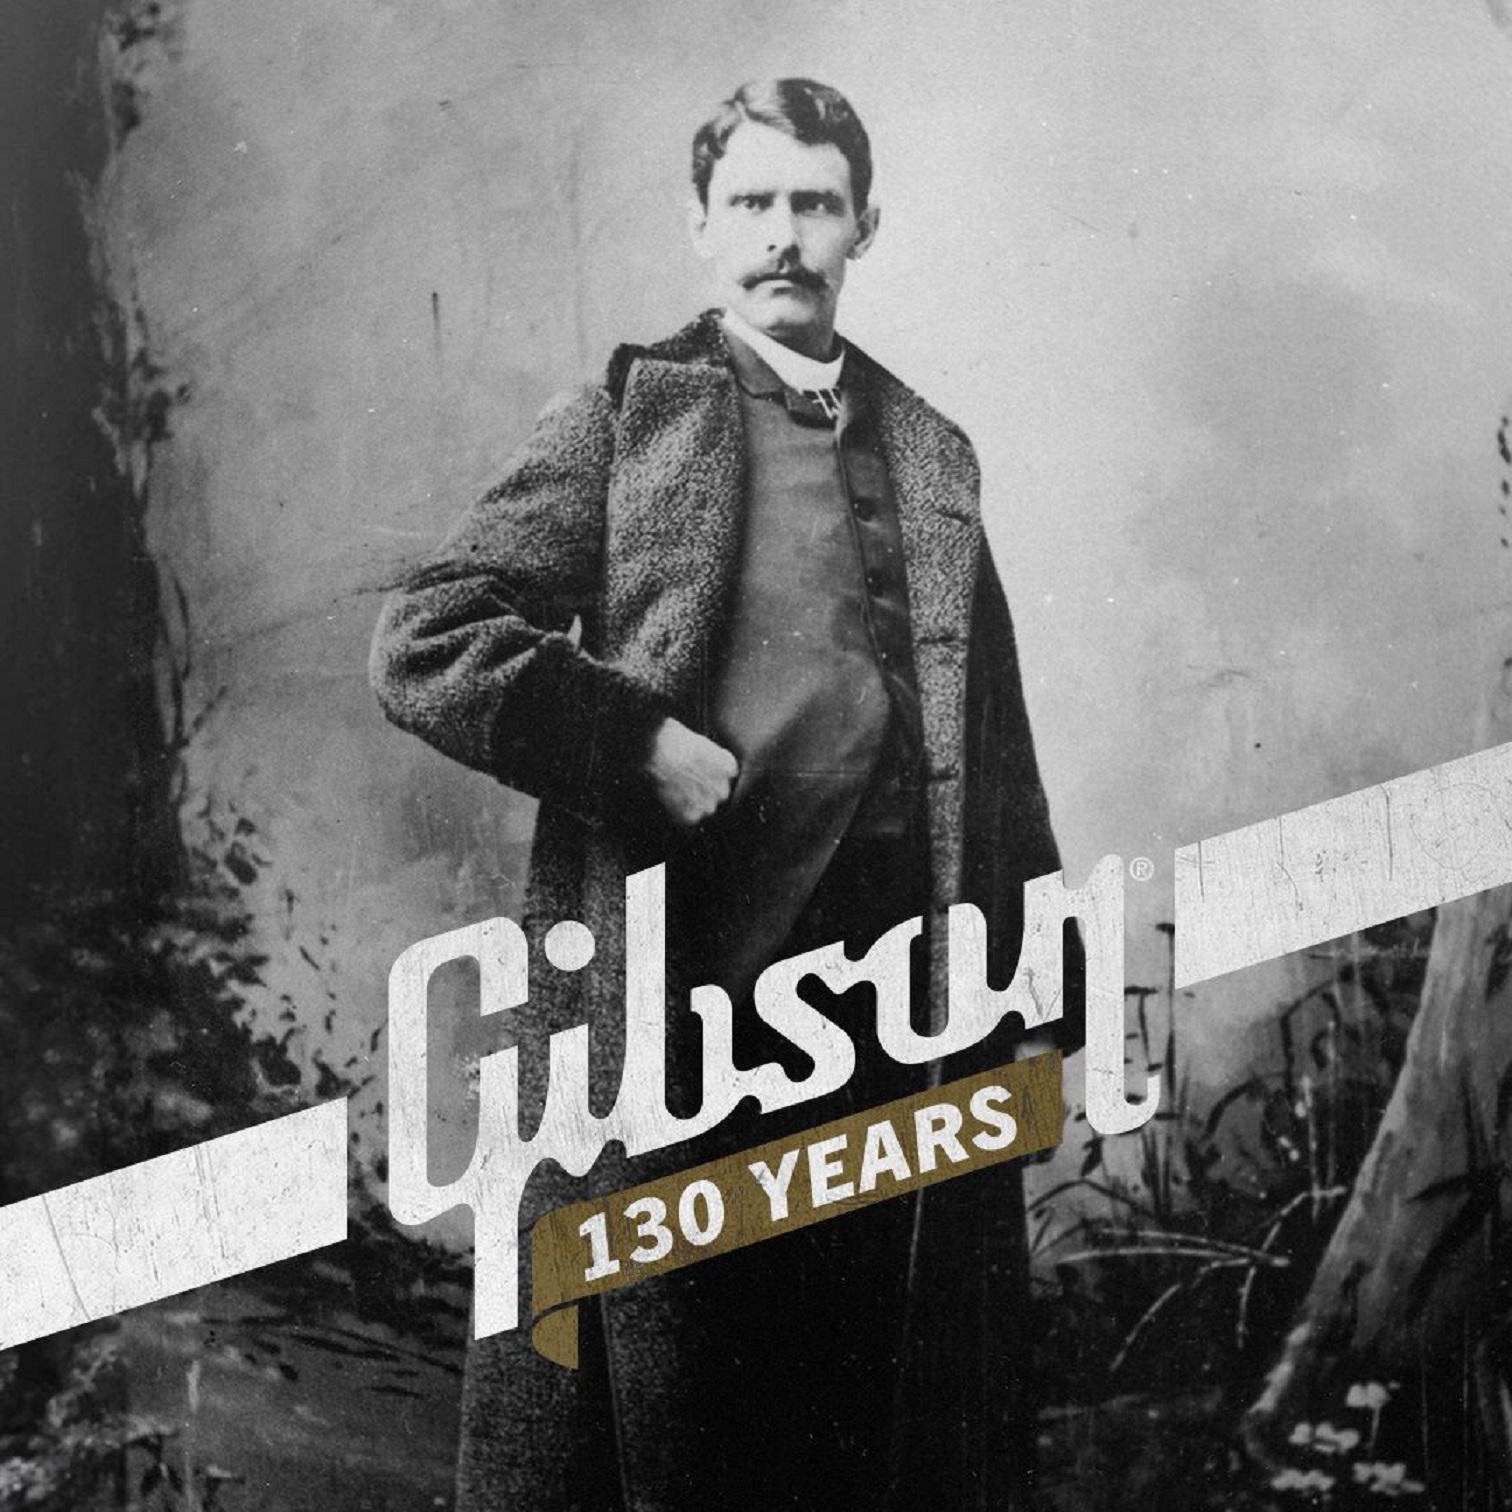 Gibson Celebrates 130 Years of Craft, Innovation, and Music